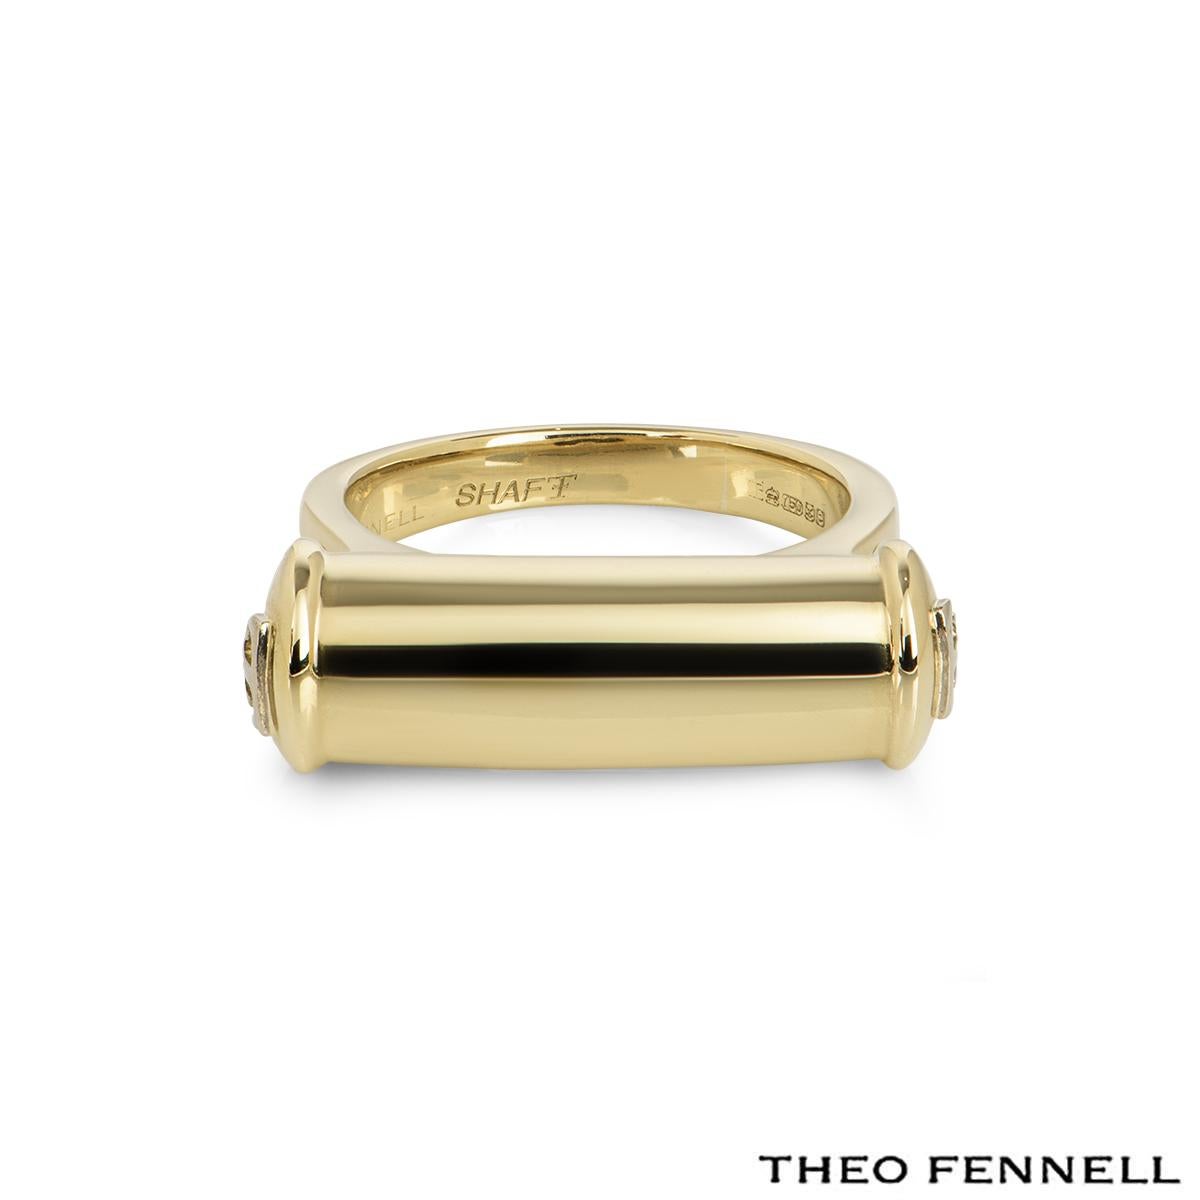 theo fennell rings